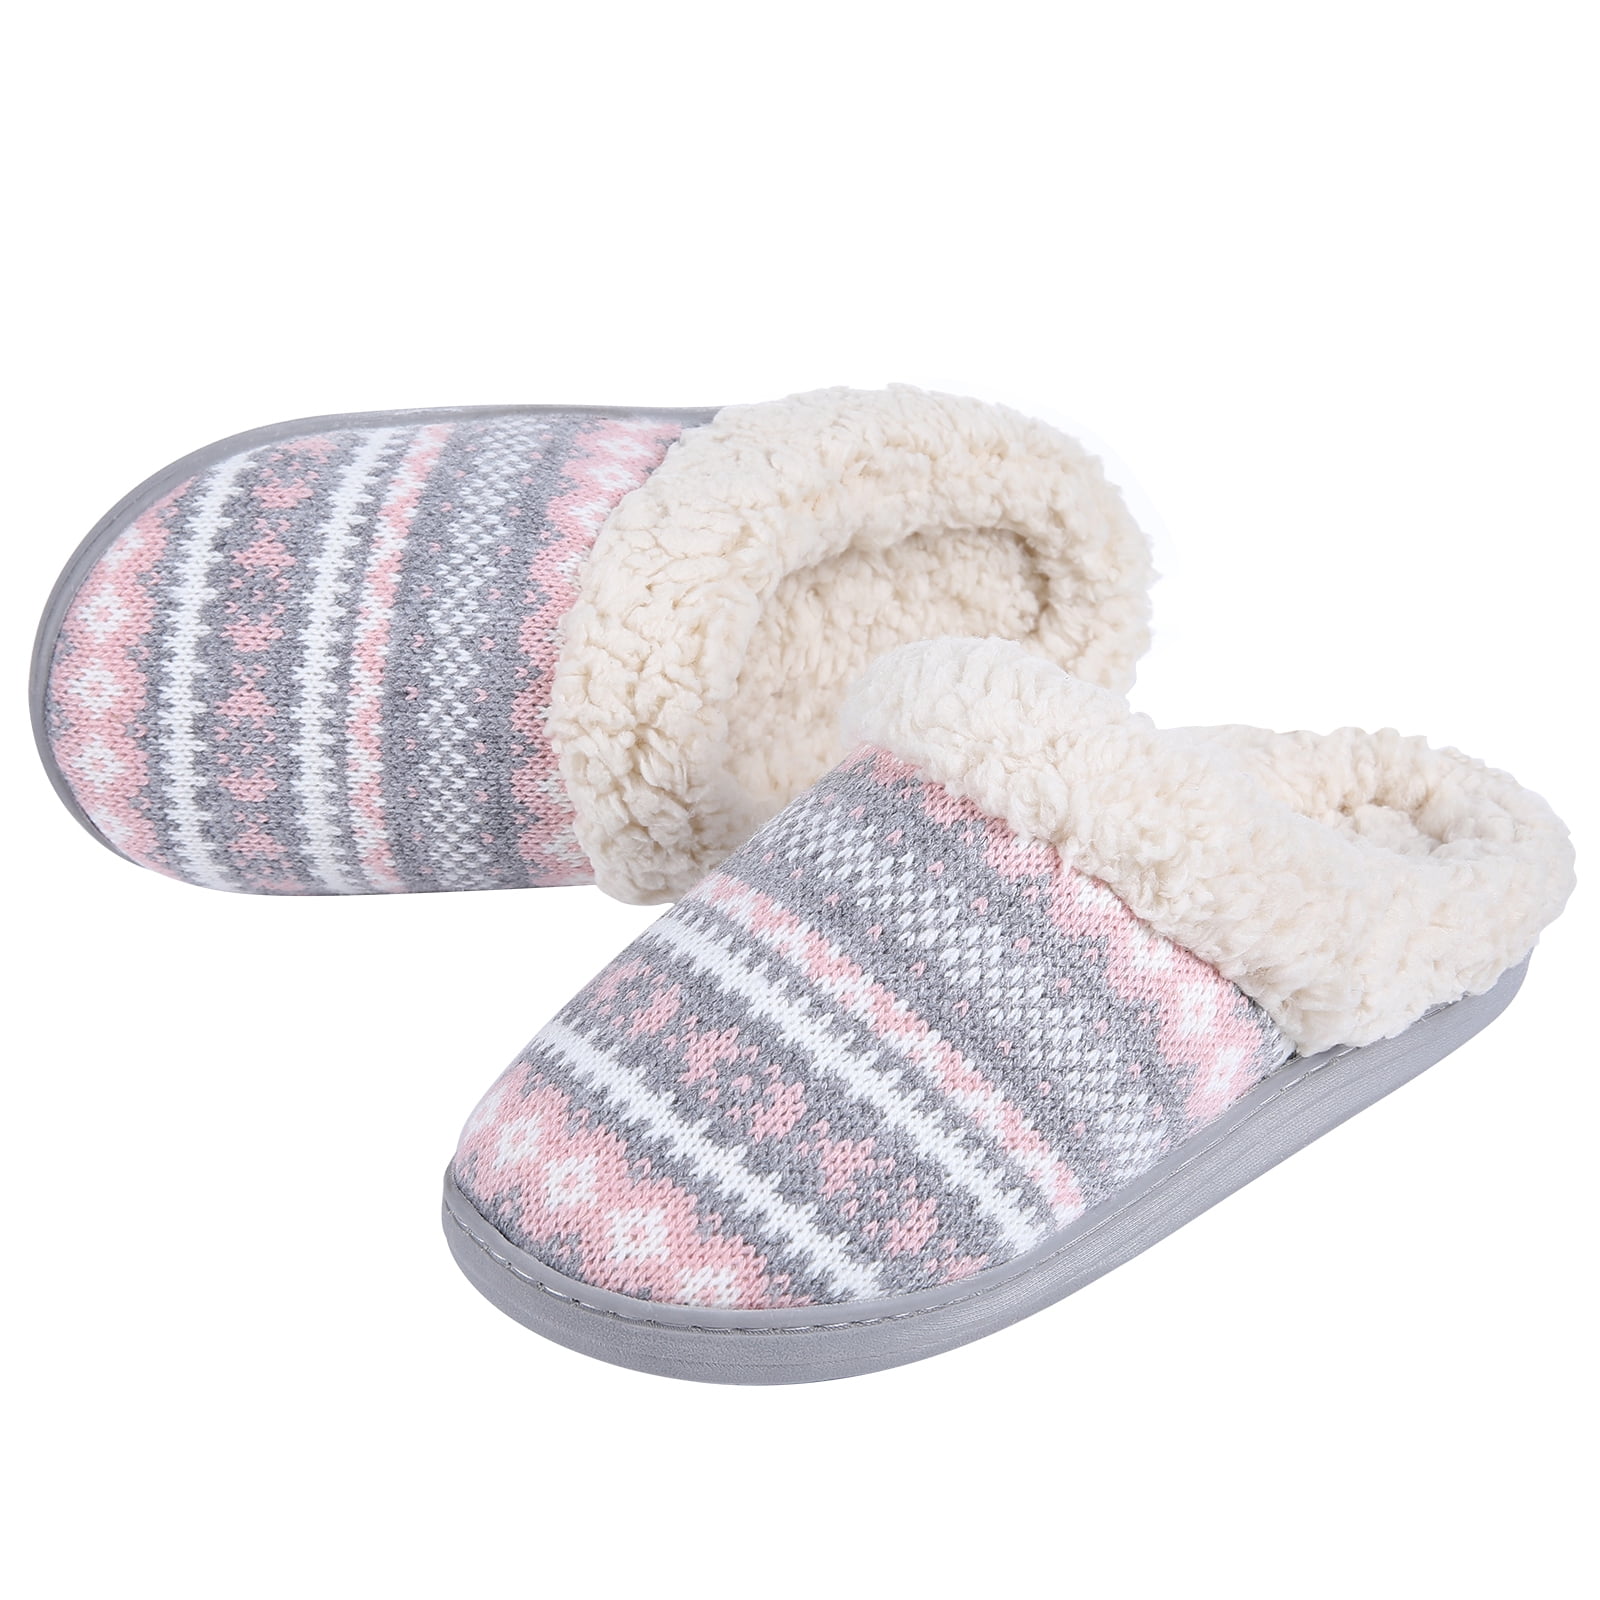 Fuzzy Slippers for Women Home Comfort Knitted Cotton Cozy Memory Foam SPA Indoors Non-skid Machine Washable Bedroom Flat for Christmas Back to School 